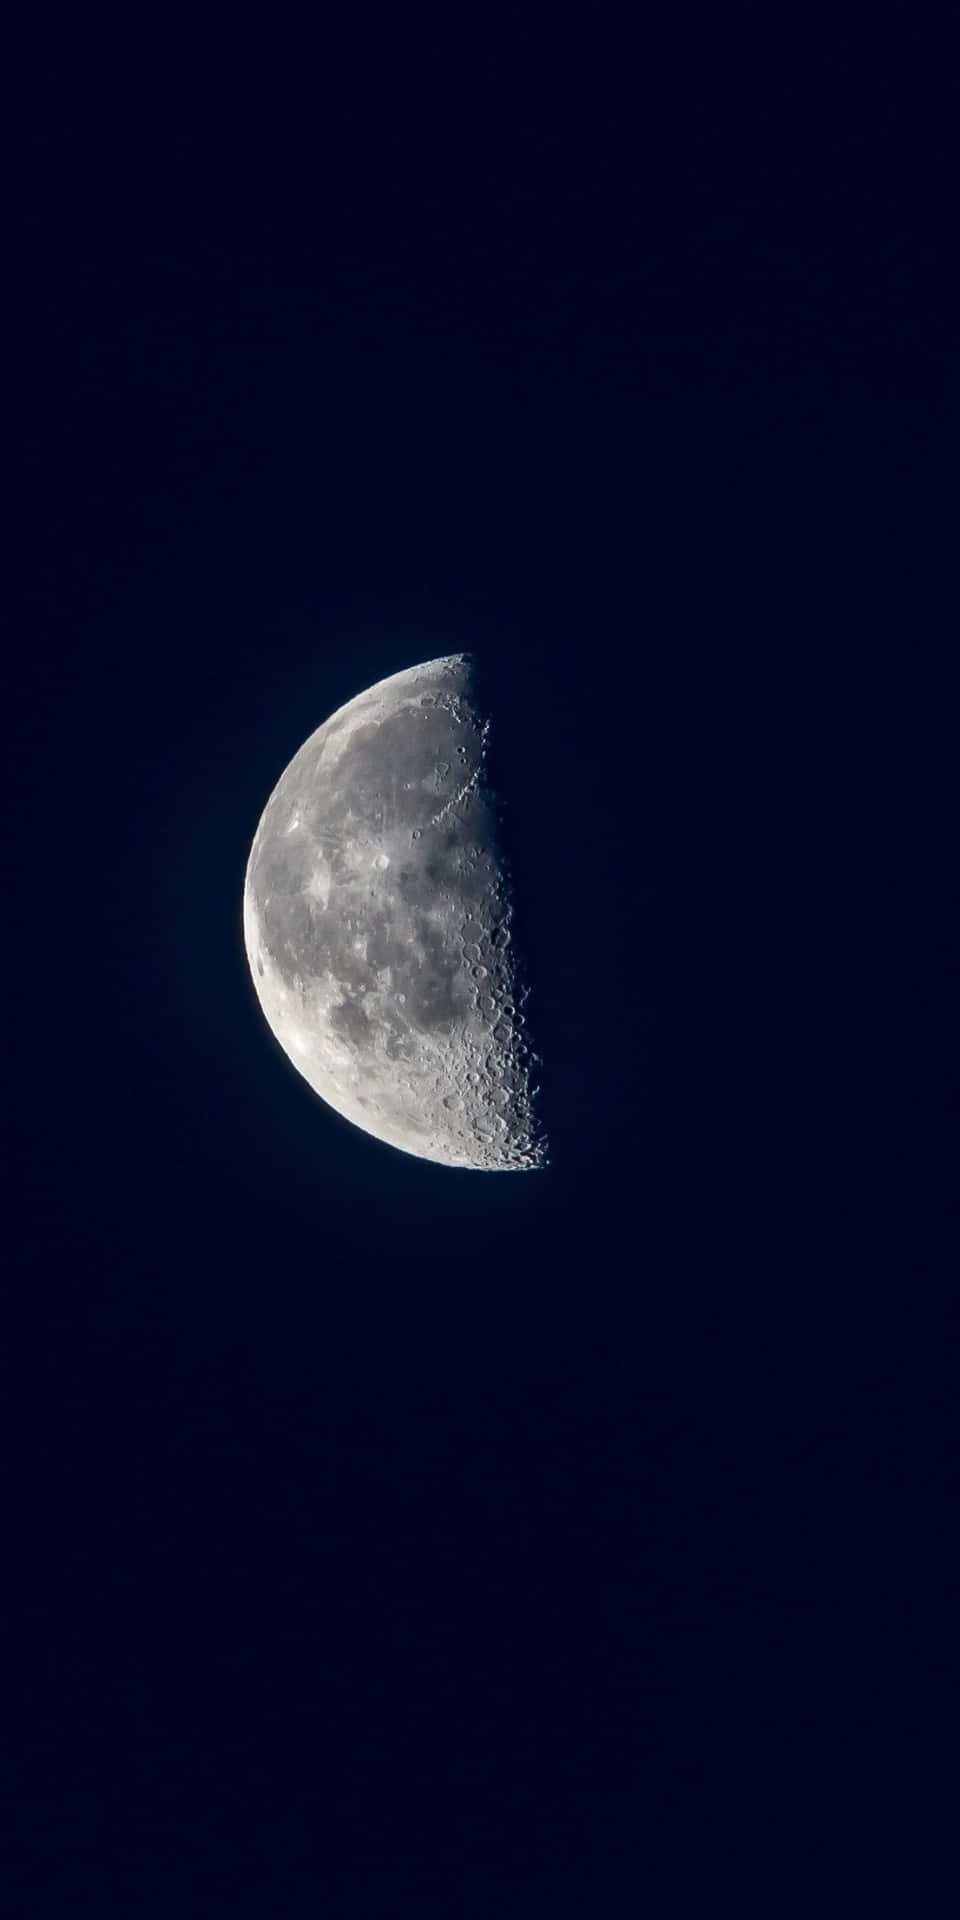 A breathtaking view of the half moon glowing in the night sky